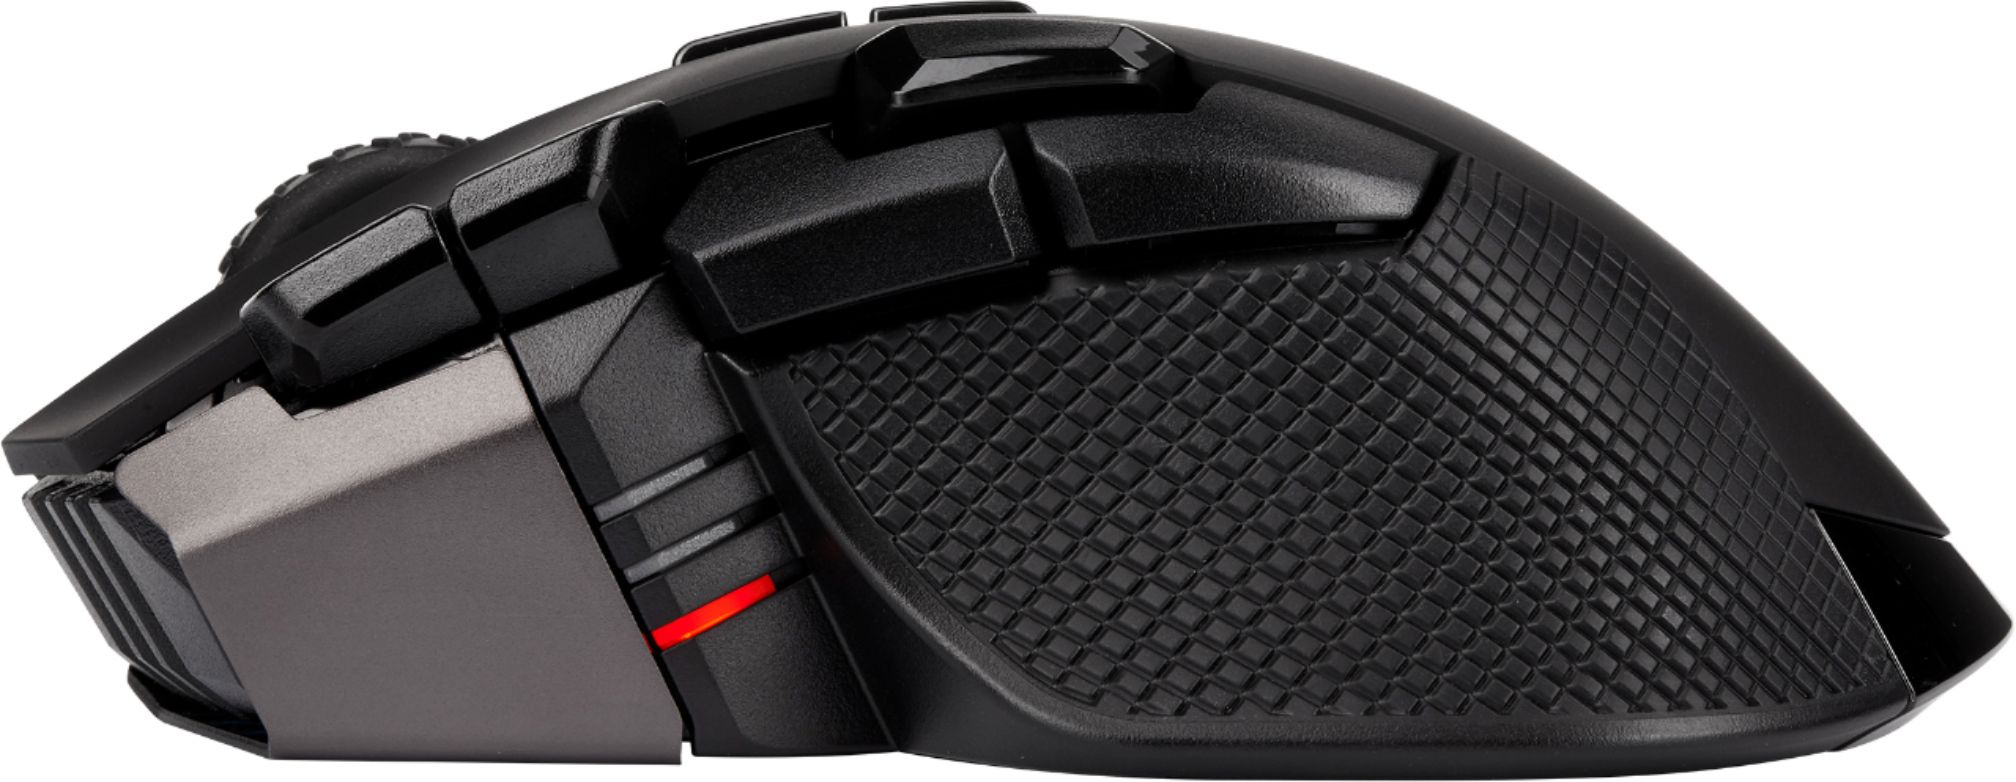 CORSAIR - IRONCLAW RGB Wireless Optical Gaming Mouse - Black